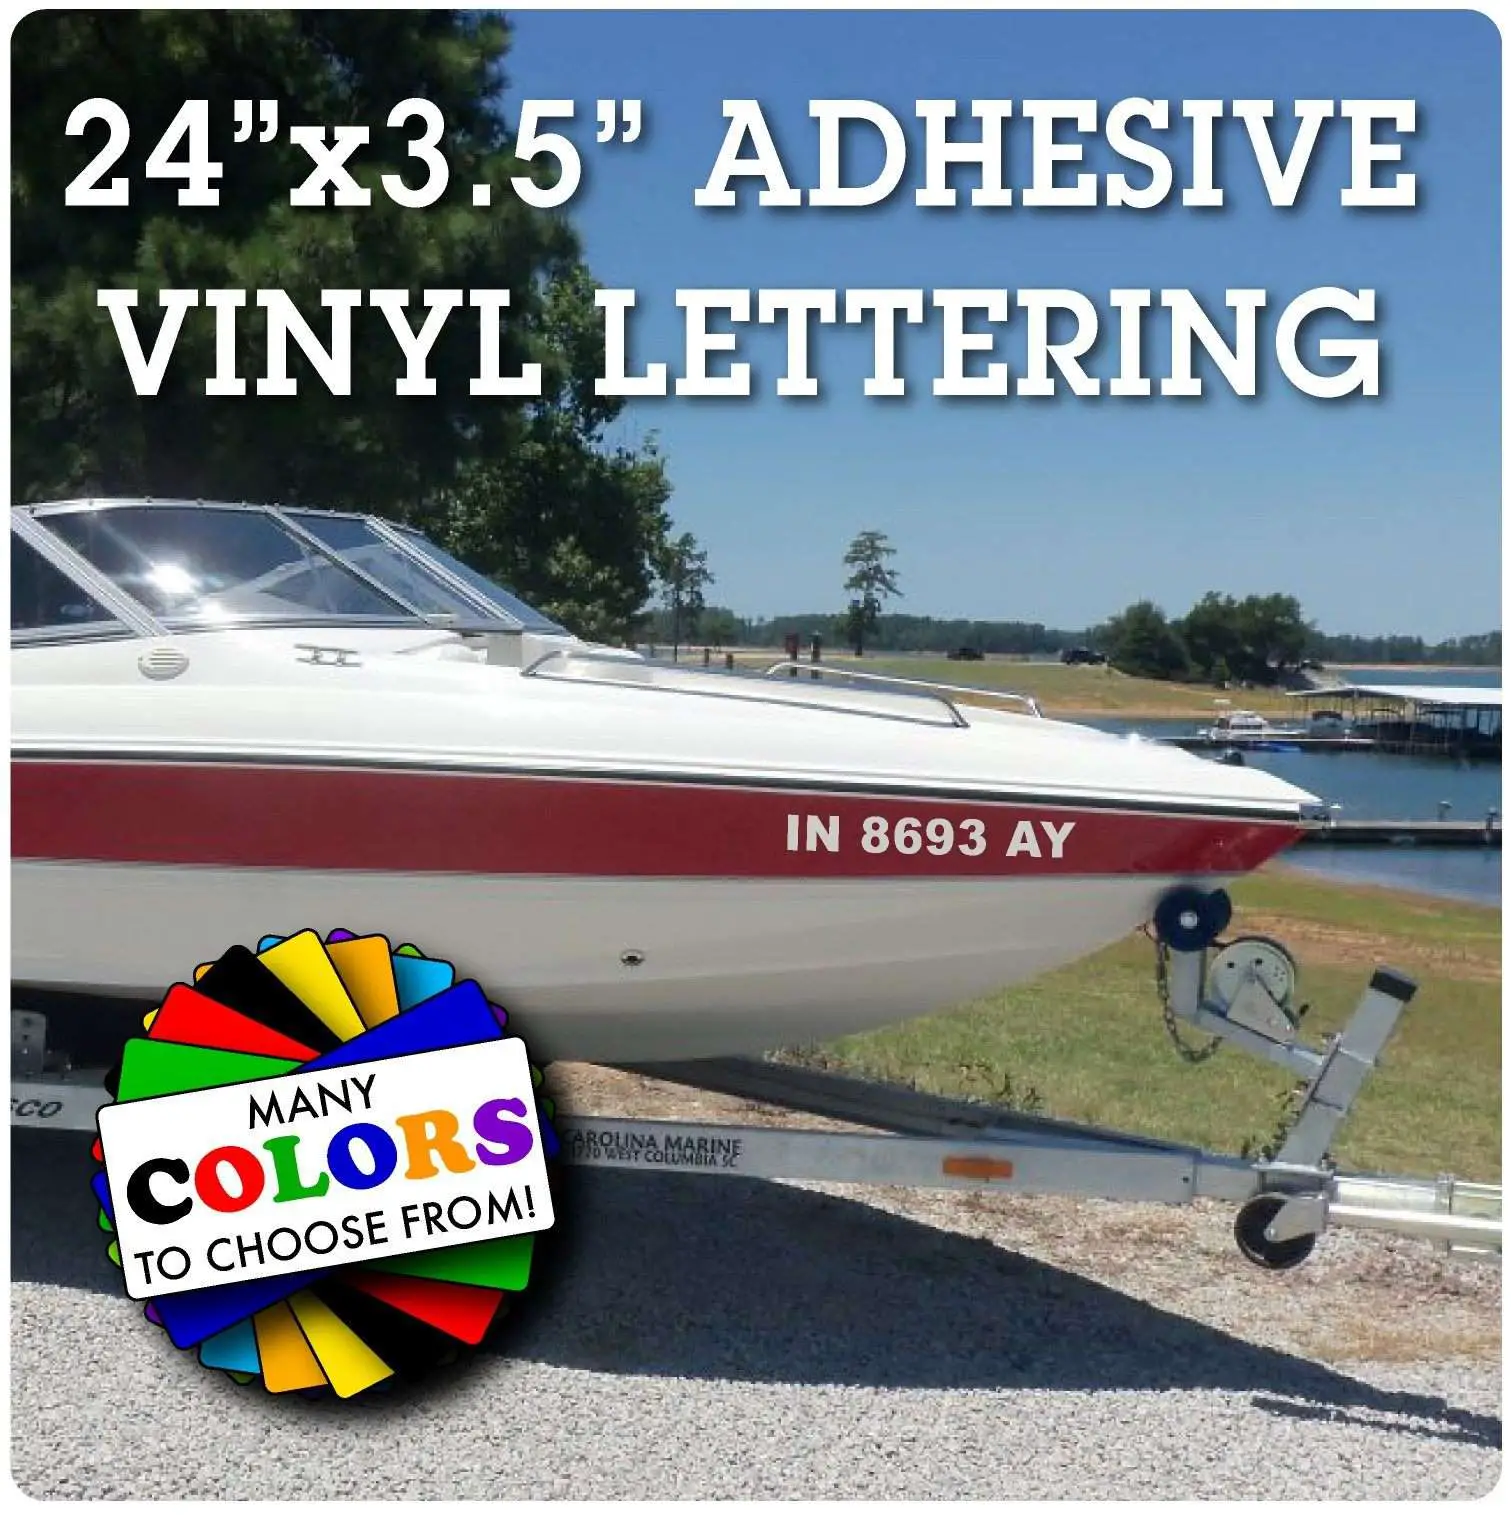 Watercraft Number Registration Sticker for Boats and Jet Skis